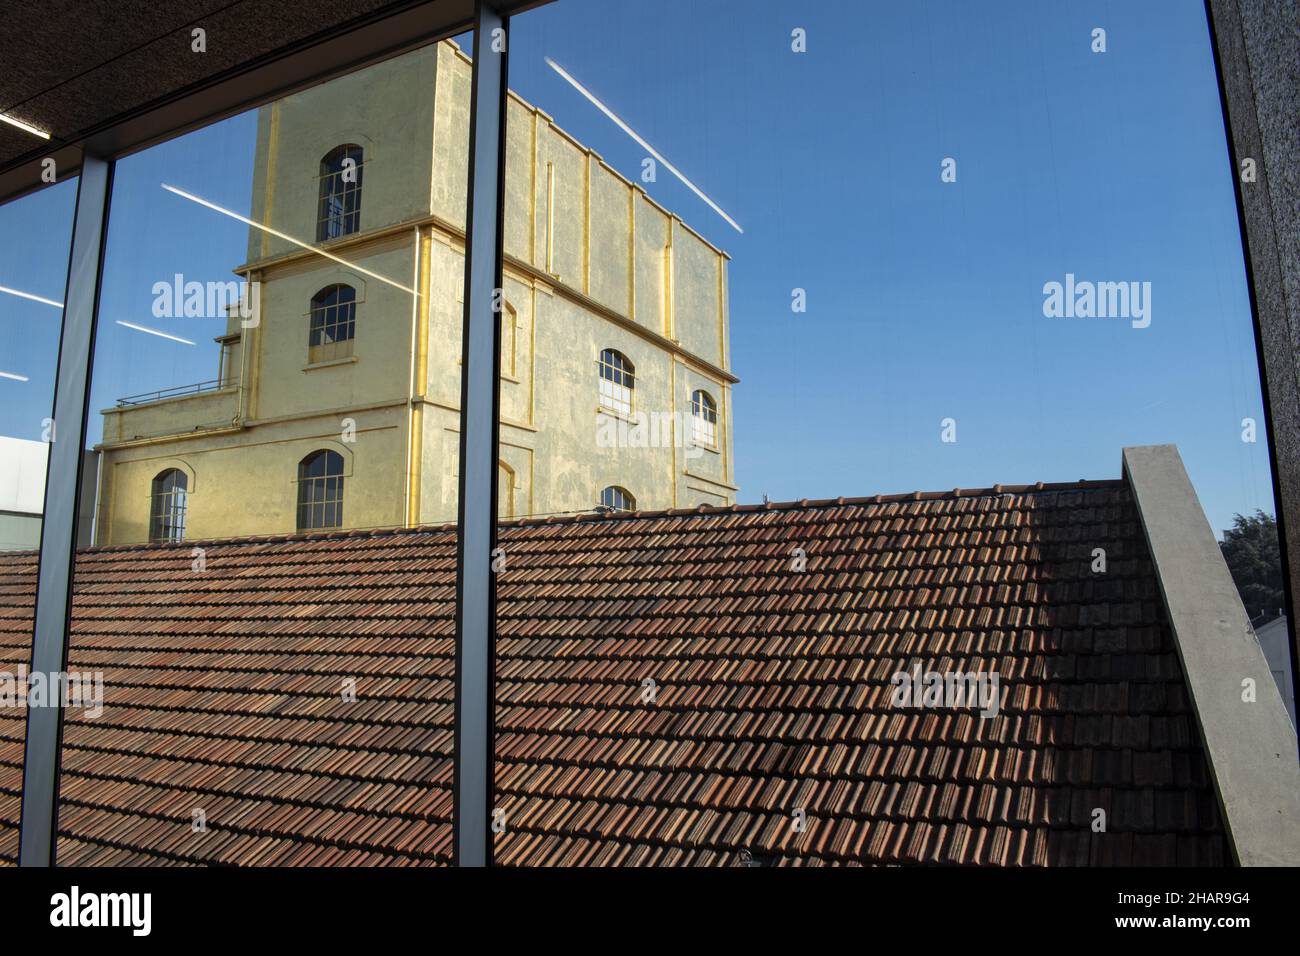 Milan, Italy: The Haunted House designed by Rem Koolhaas, covered with a layer of gold leaf, seen from inside one of the buildings of Fondazione Prada Stock Photo